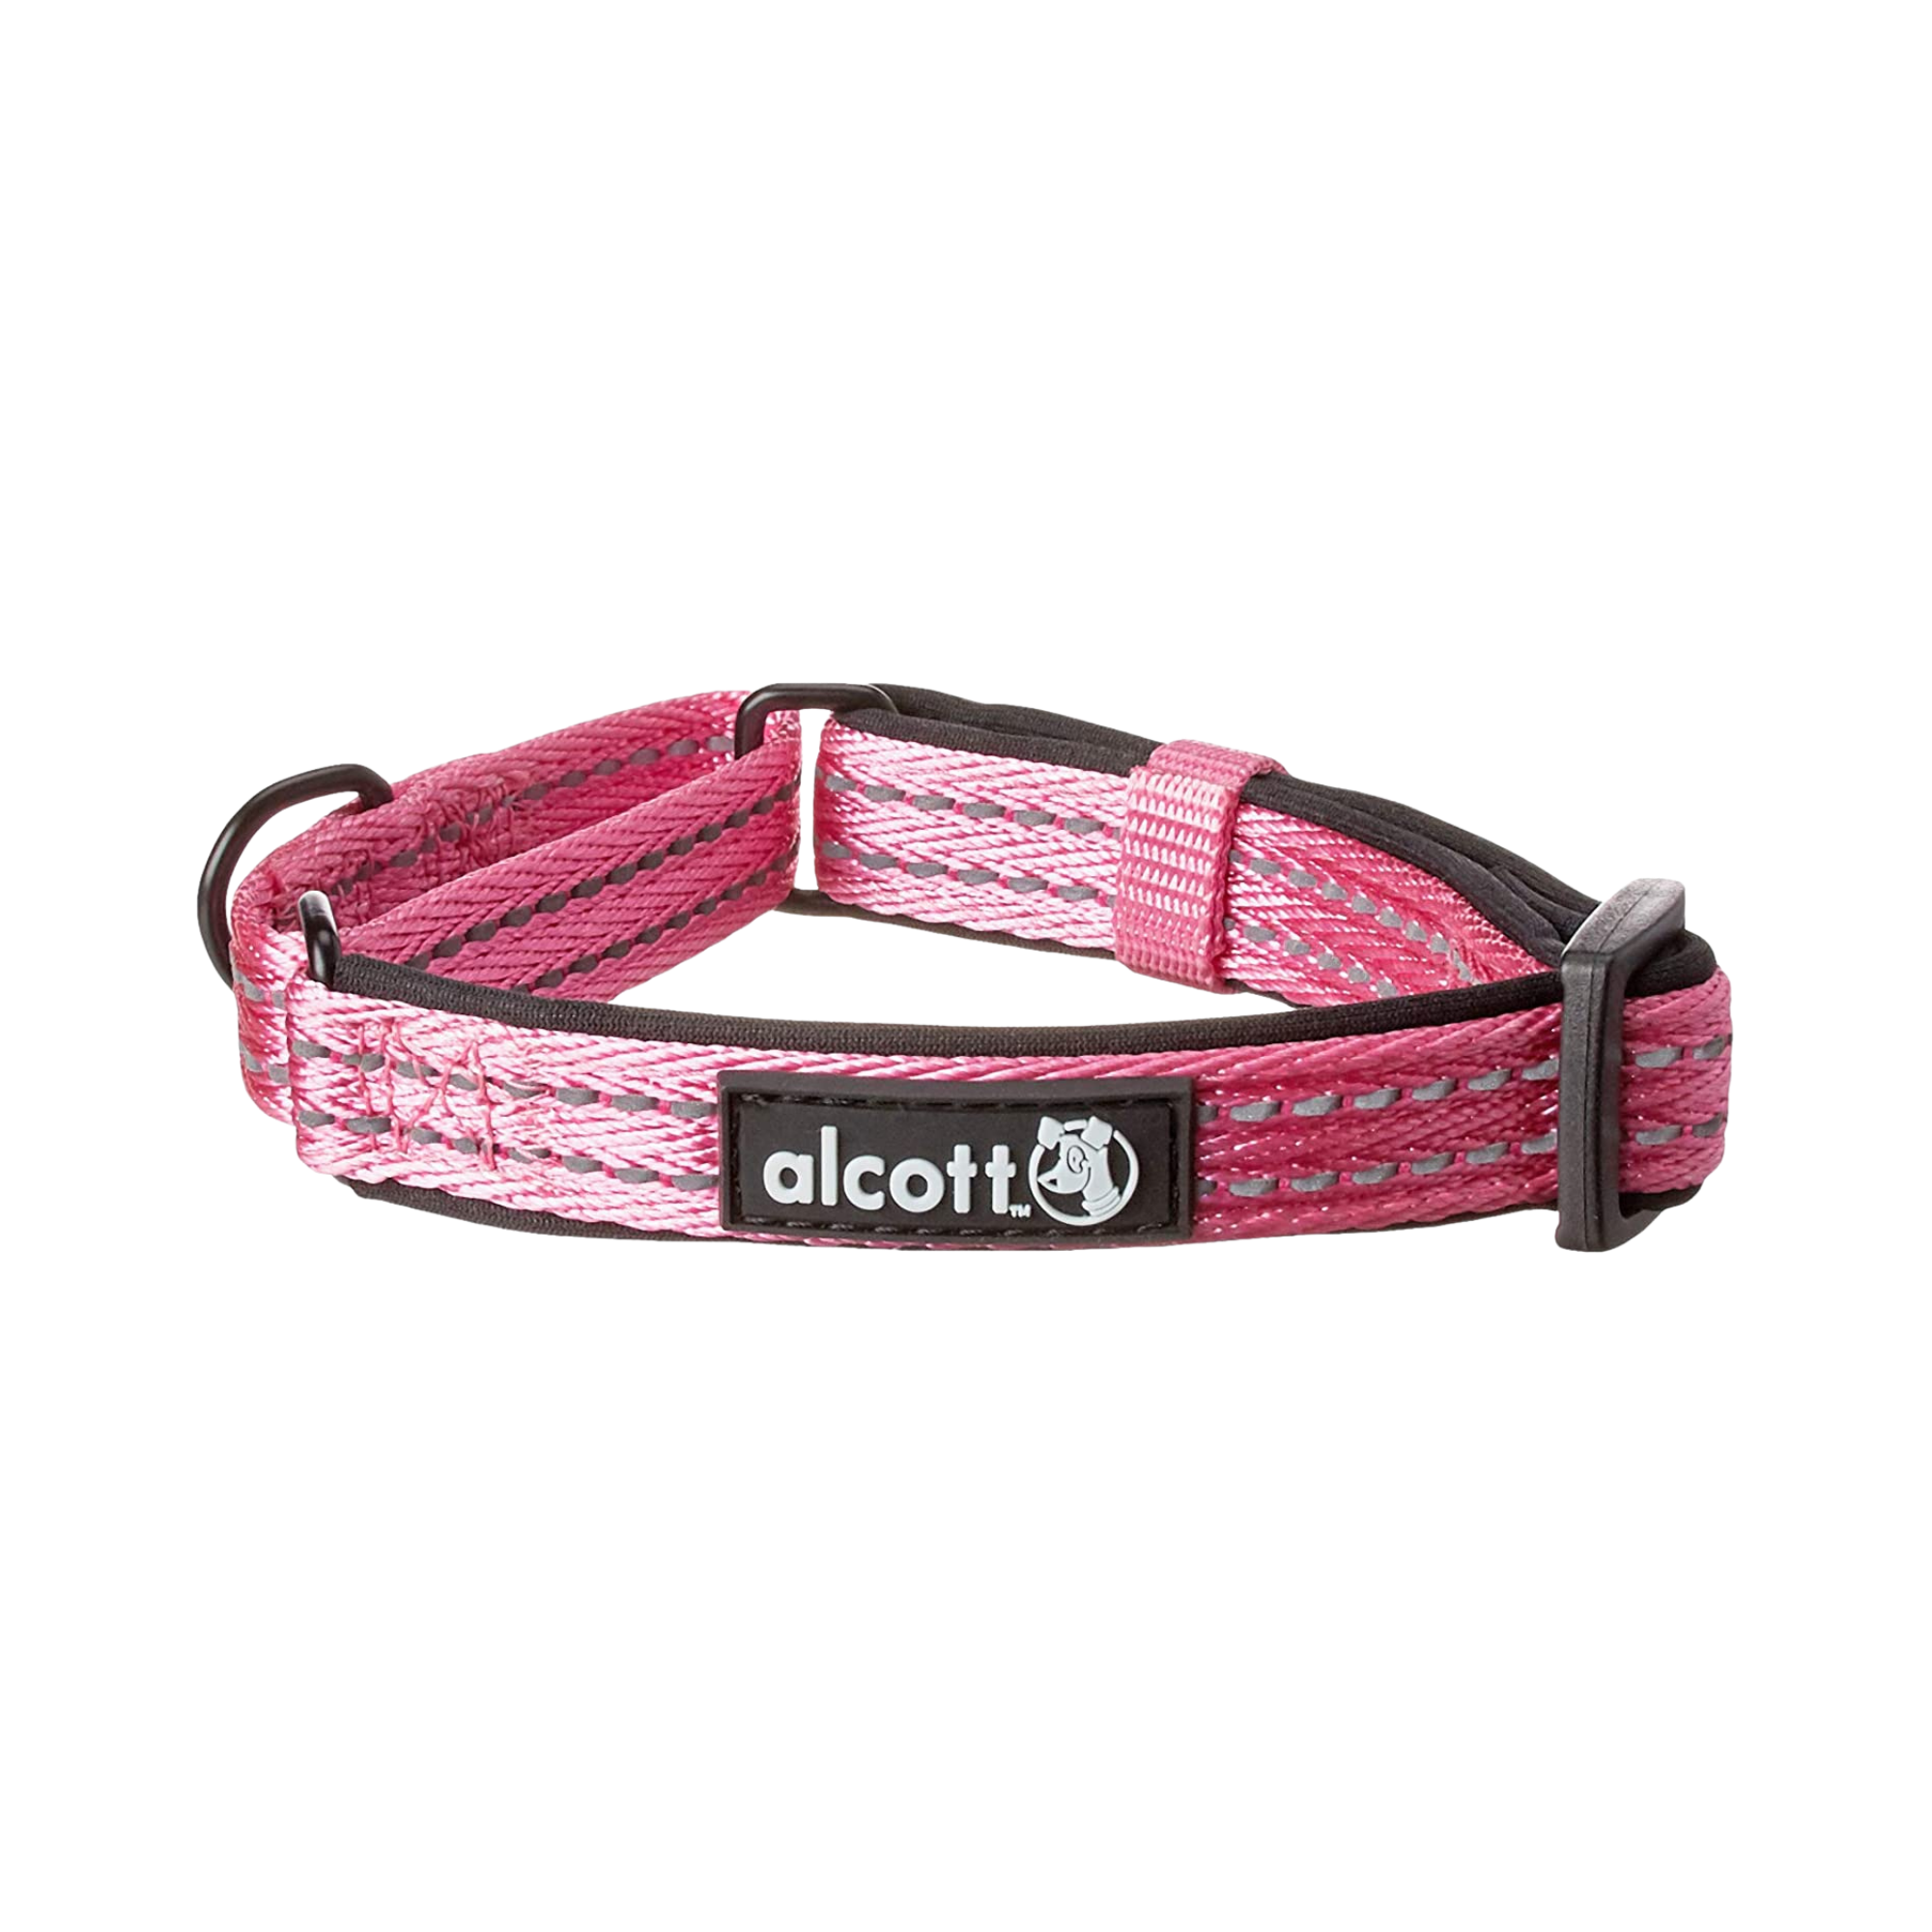 Alcott Martingale Collar Pink - Mutts & Co.